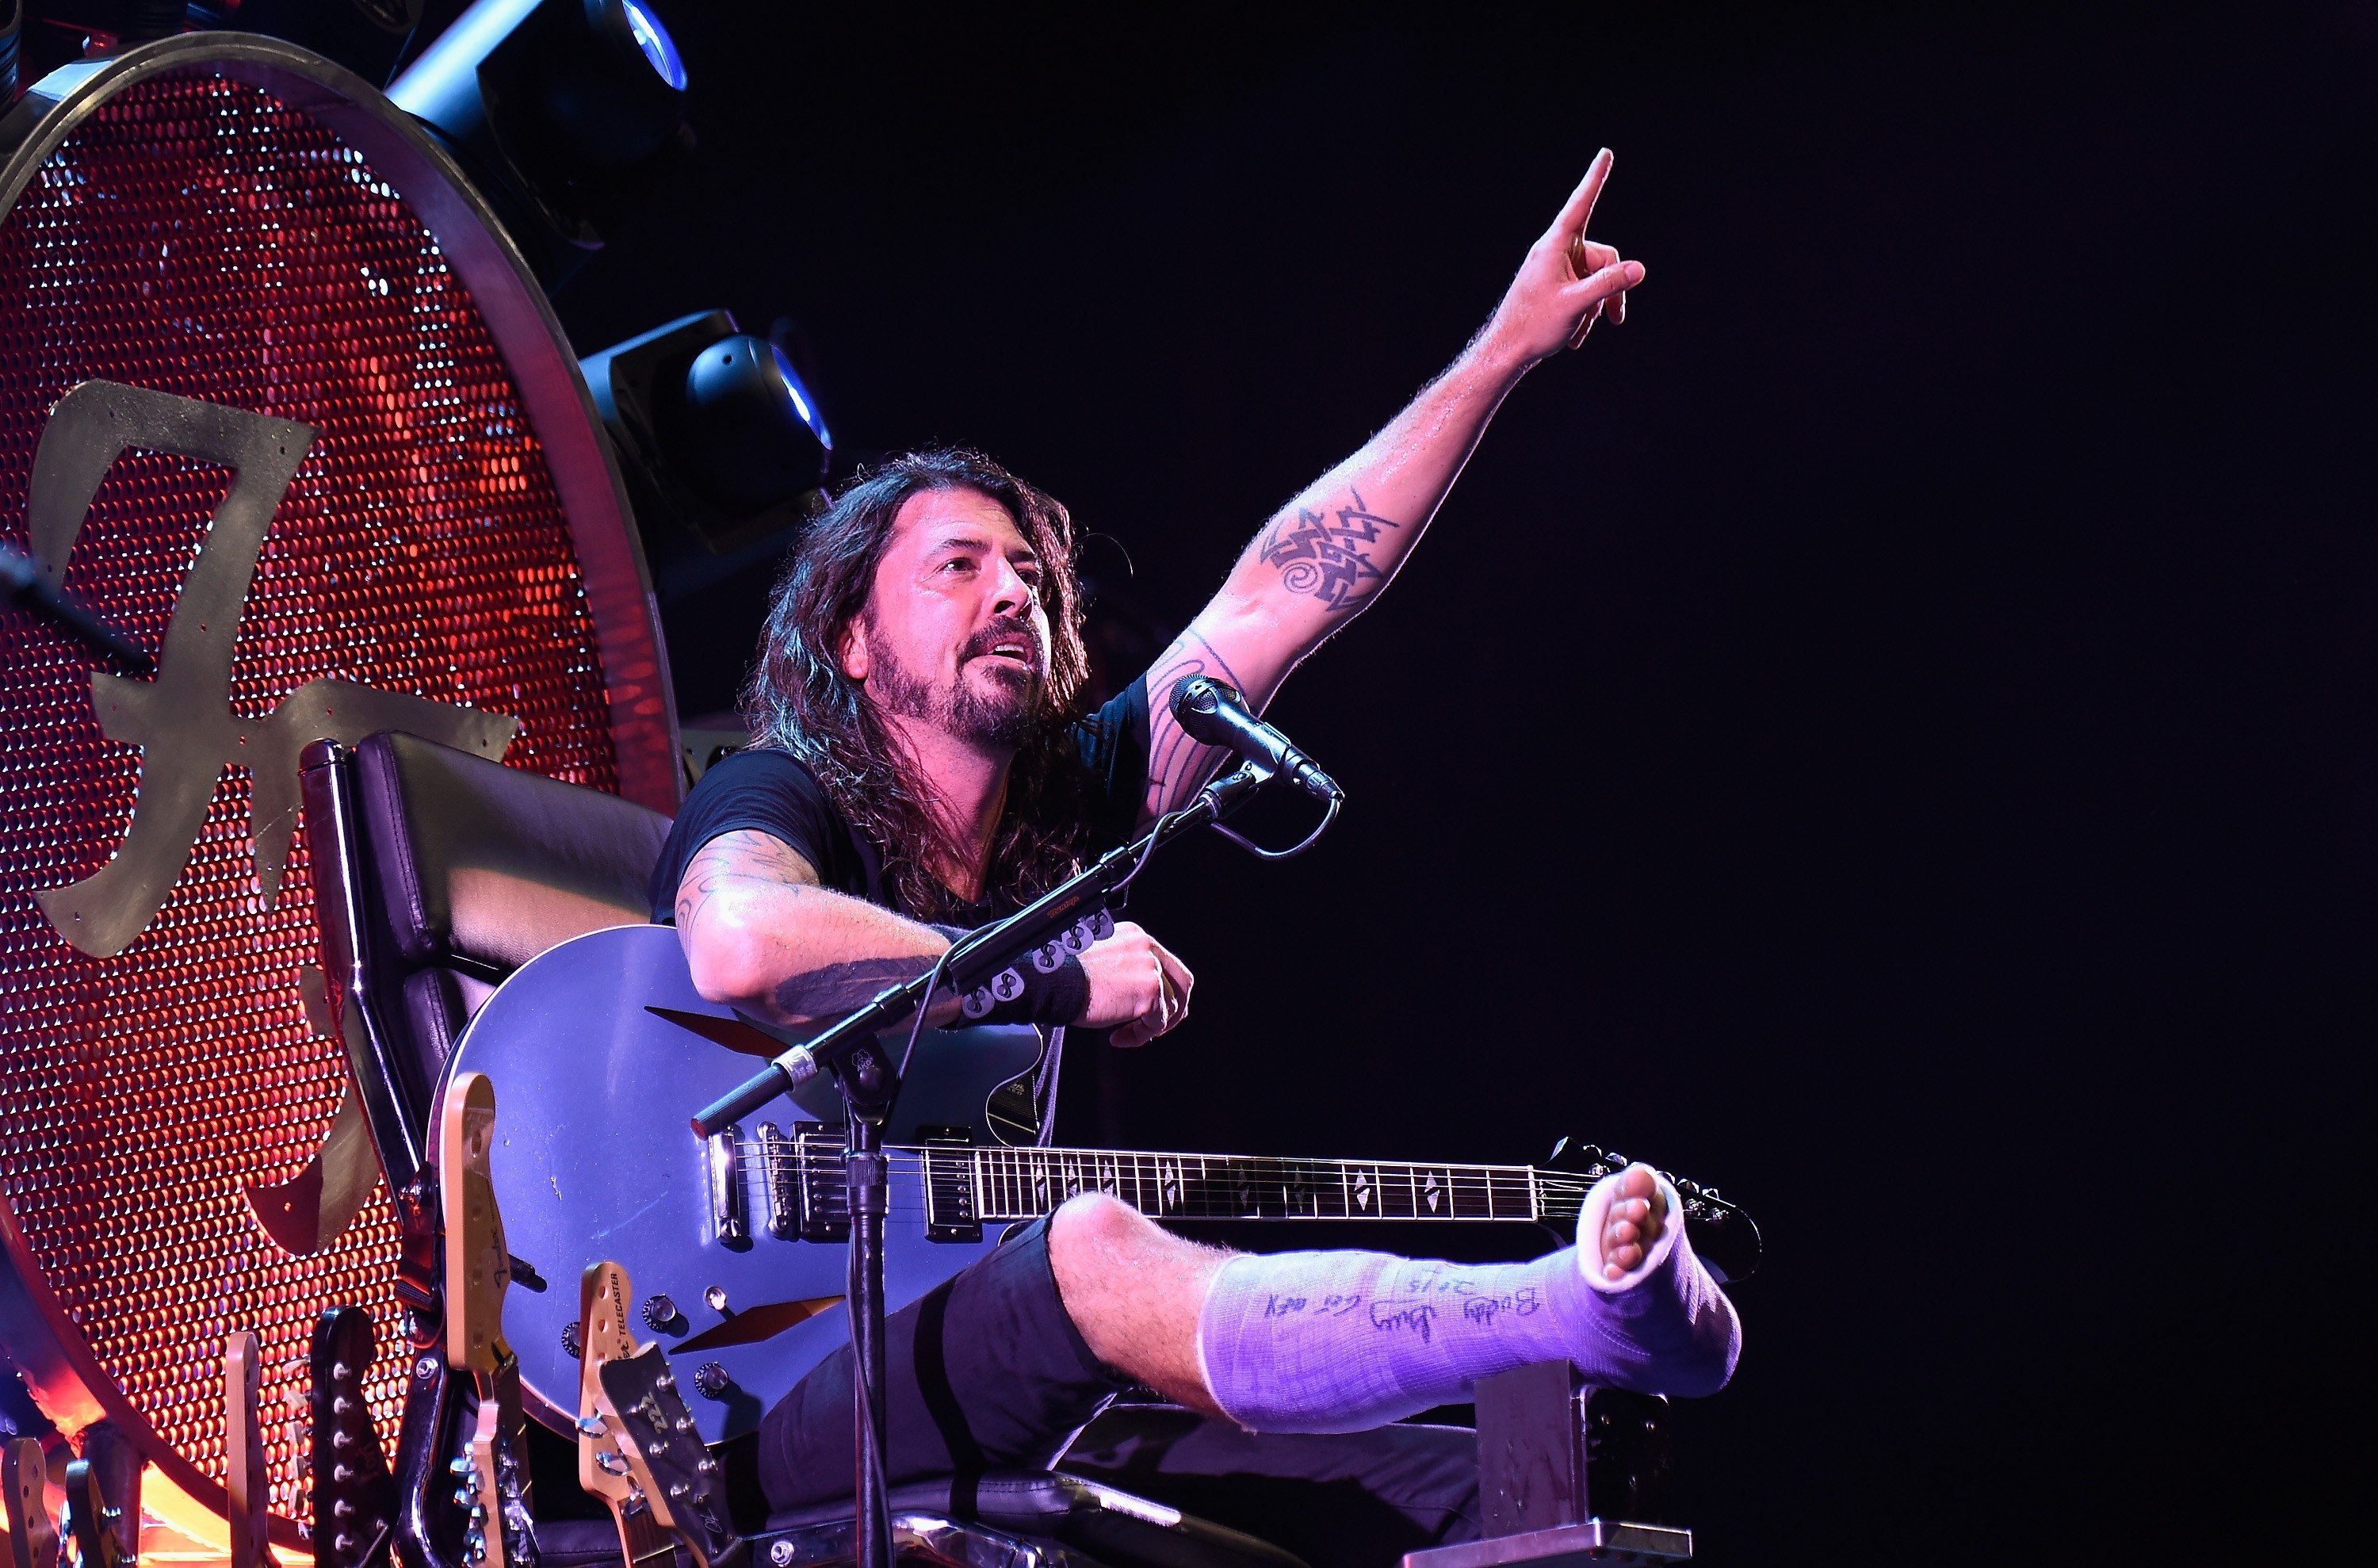 Music live Foo Fighters Dave Grohl wallpaper  2560x1600  187034   WallpaperUP